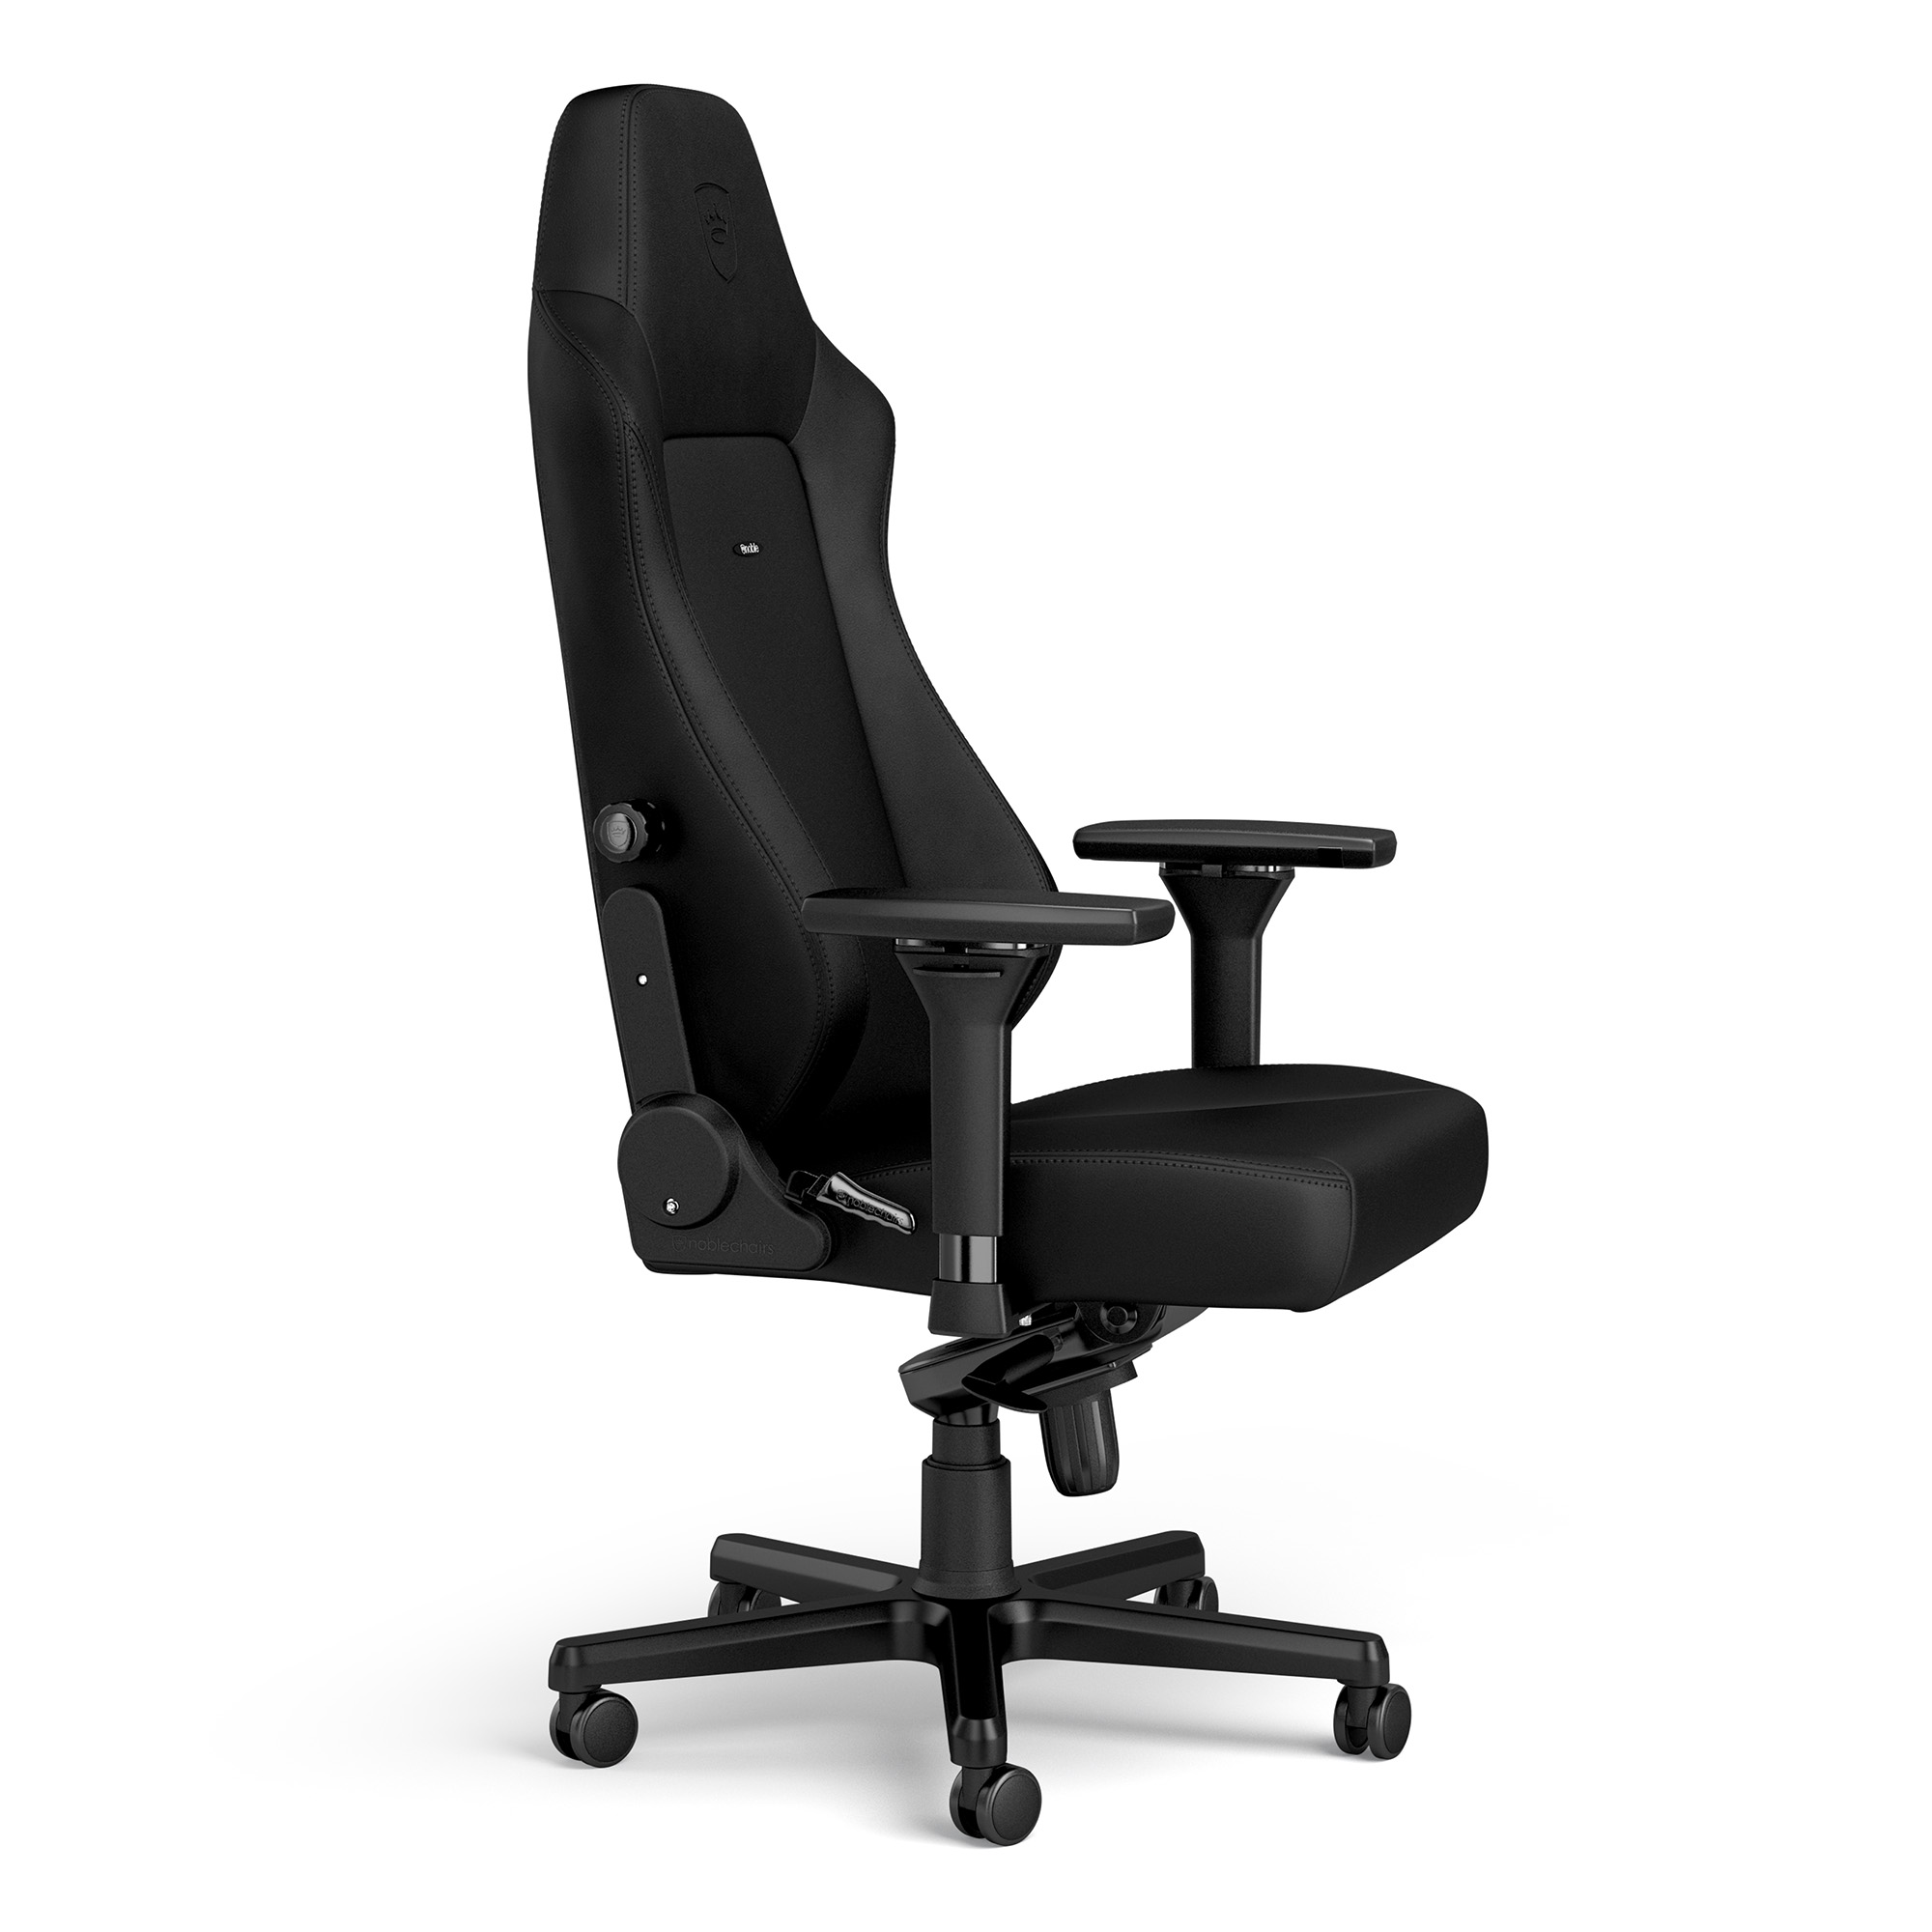 noblechairs - noblechairs HERO Gaming Chair - Black Edition